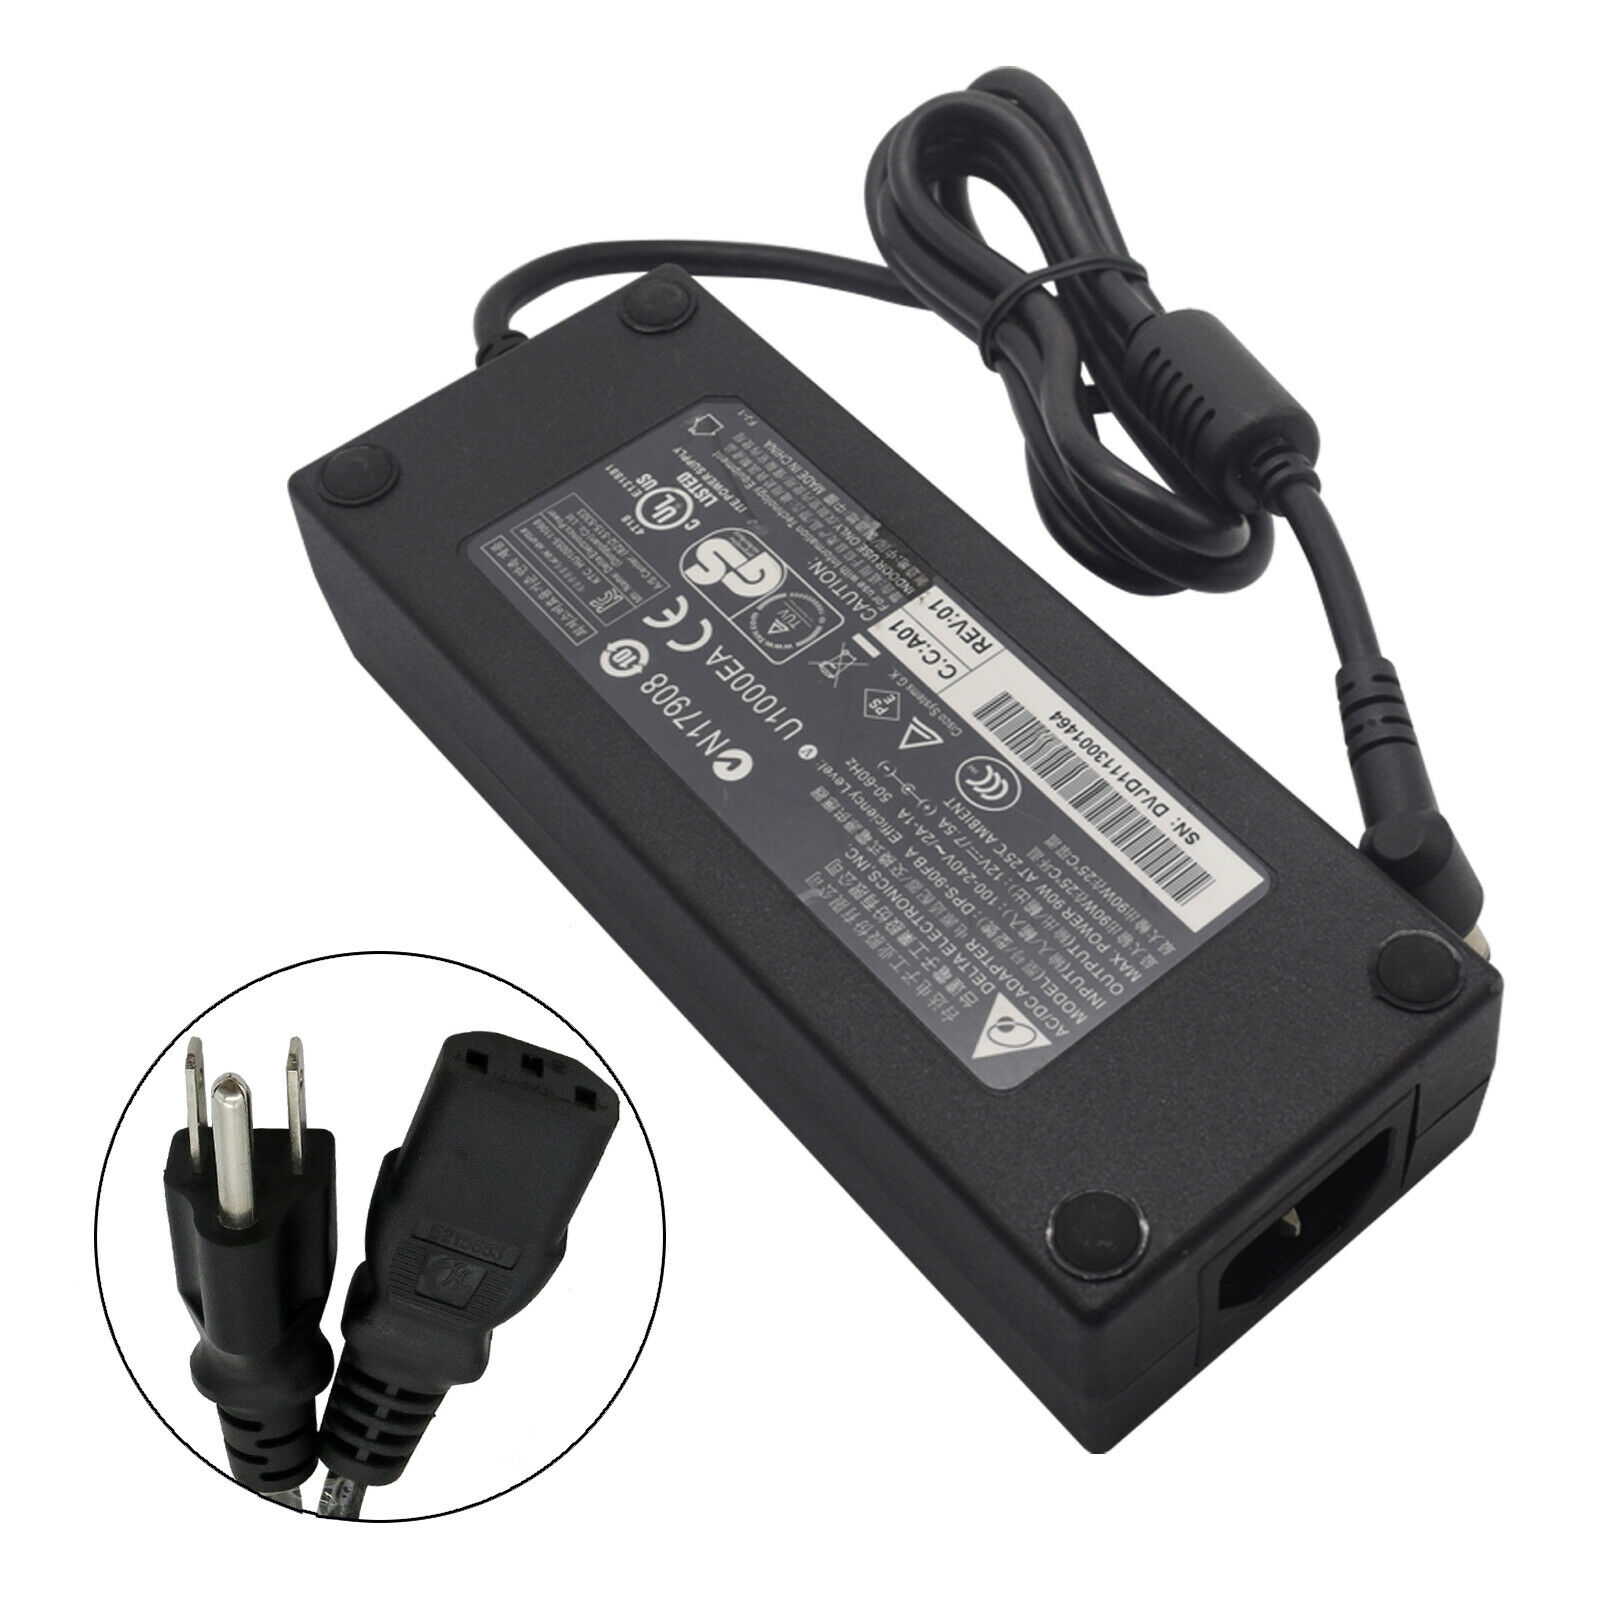 Genuine Power Supply AC DC Adapter Charger For QNAP 2-Bay NAS/NVR Manufacturer Warranty: 1 month Model: Does not appl